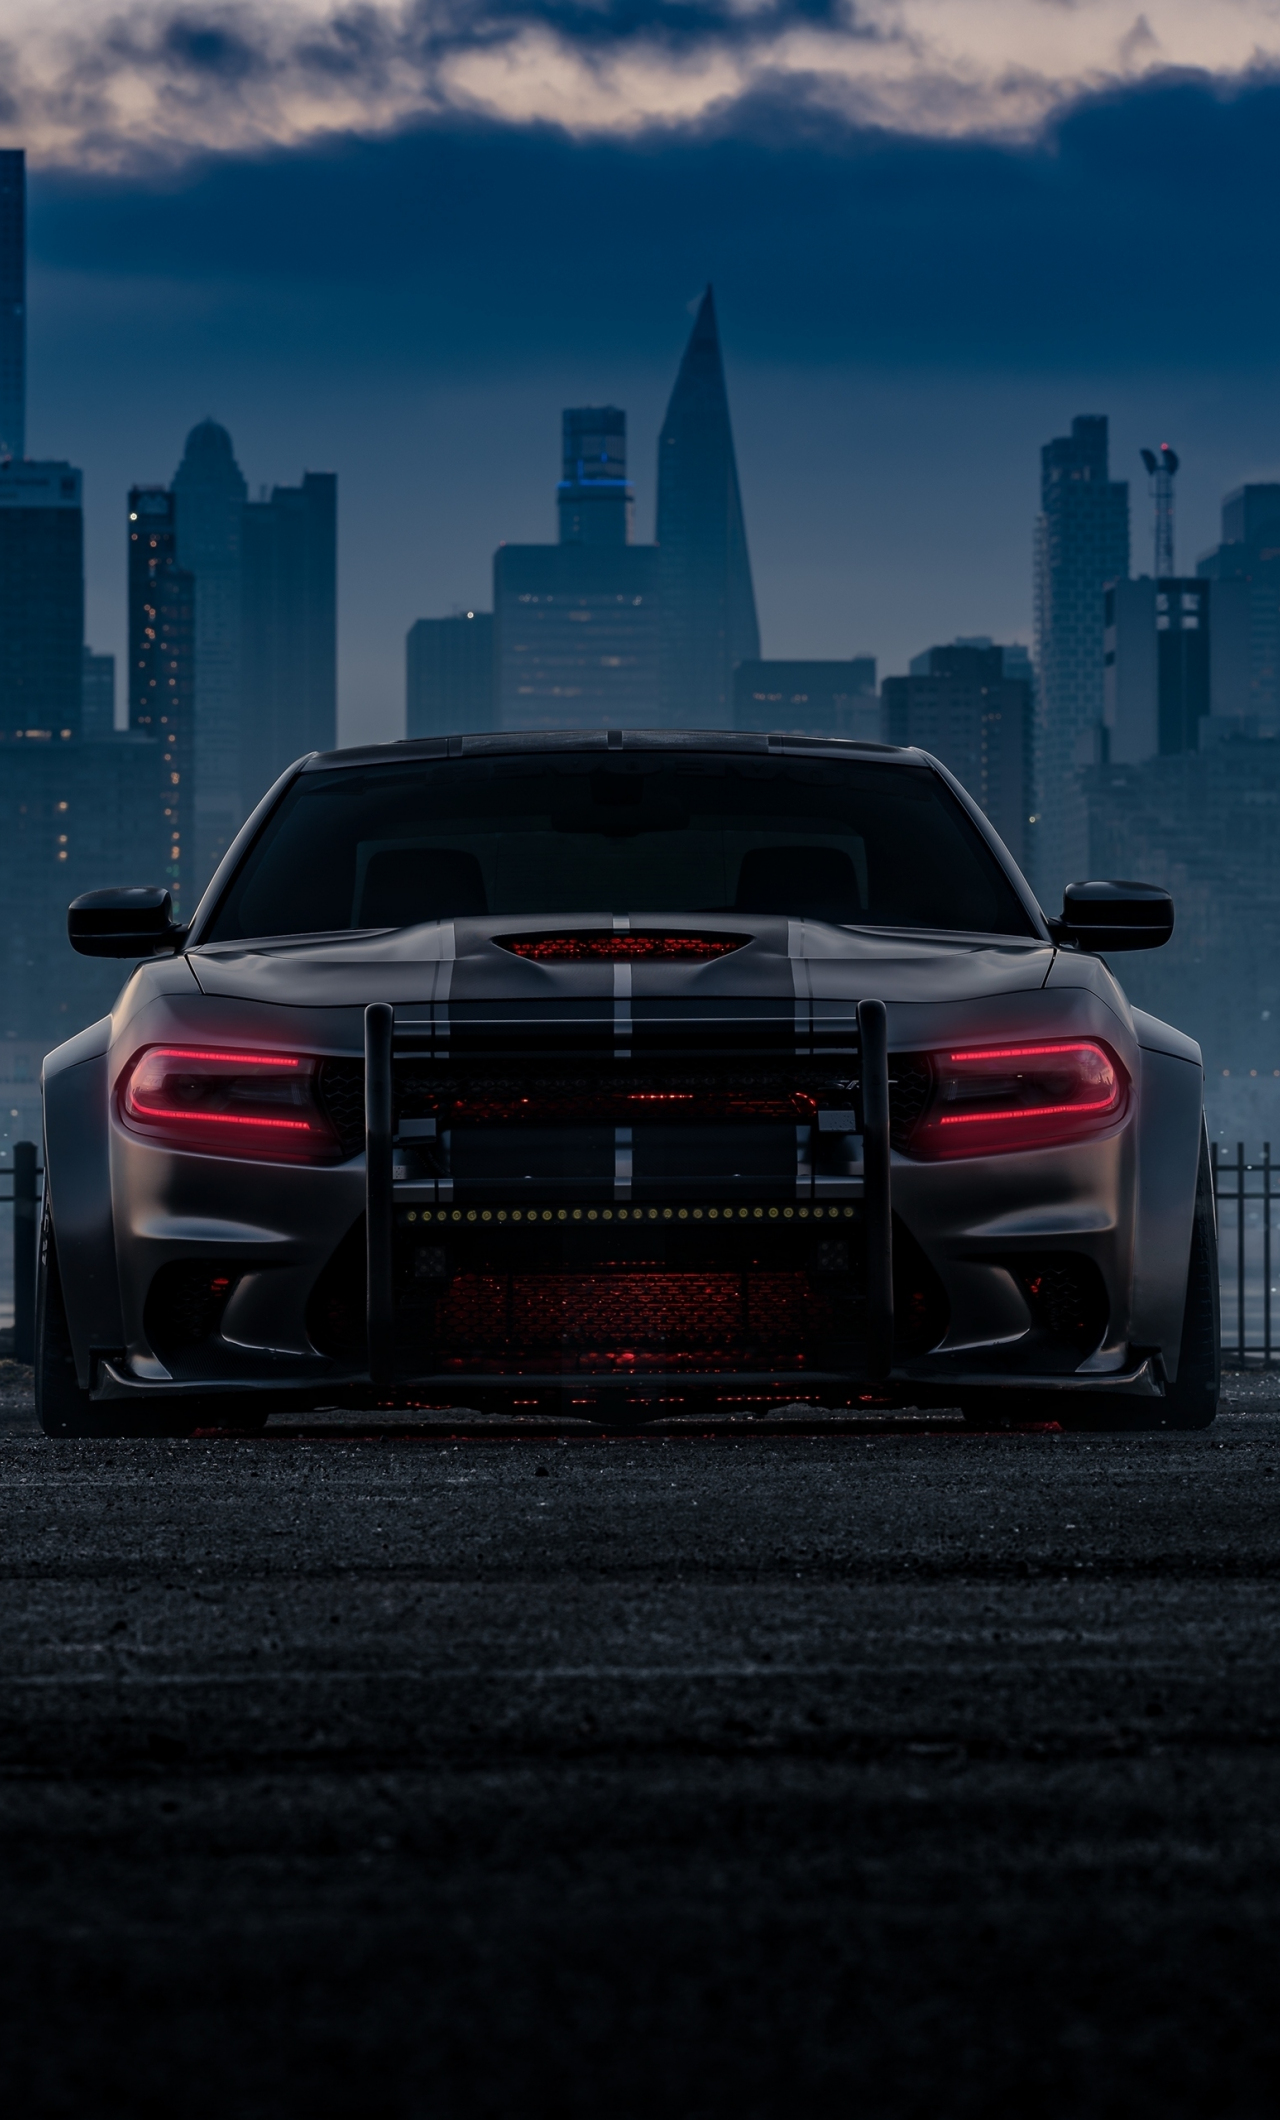 Download wallpaper 938x1668 dodge charger rt 69 dodge car old gray  desert iphone 876s6 for parallax hd background